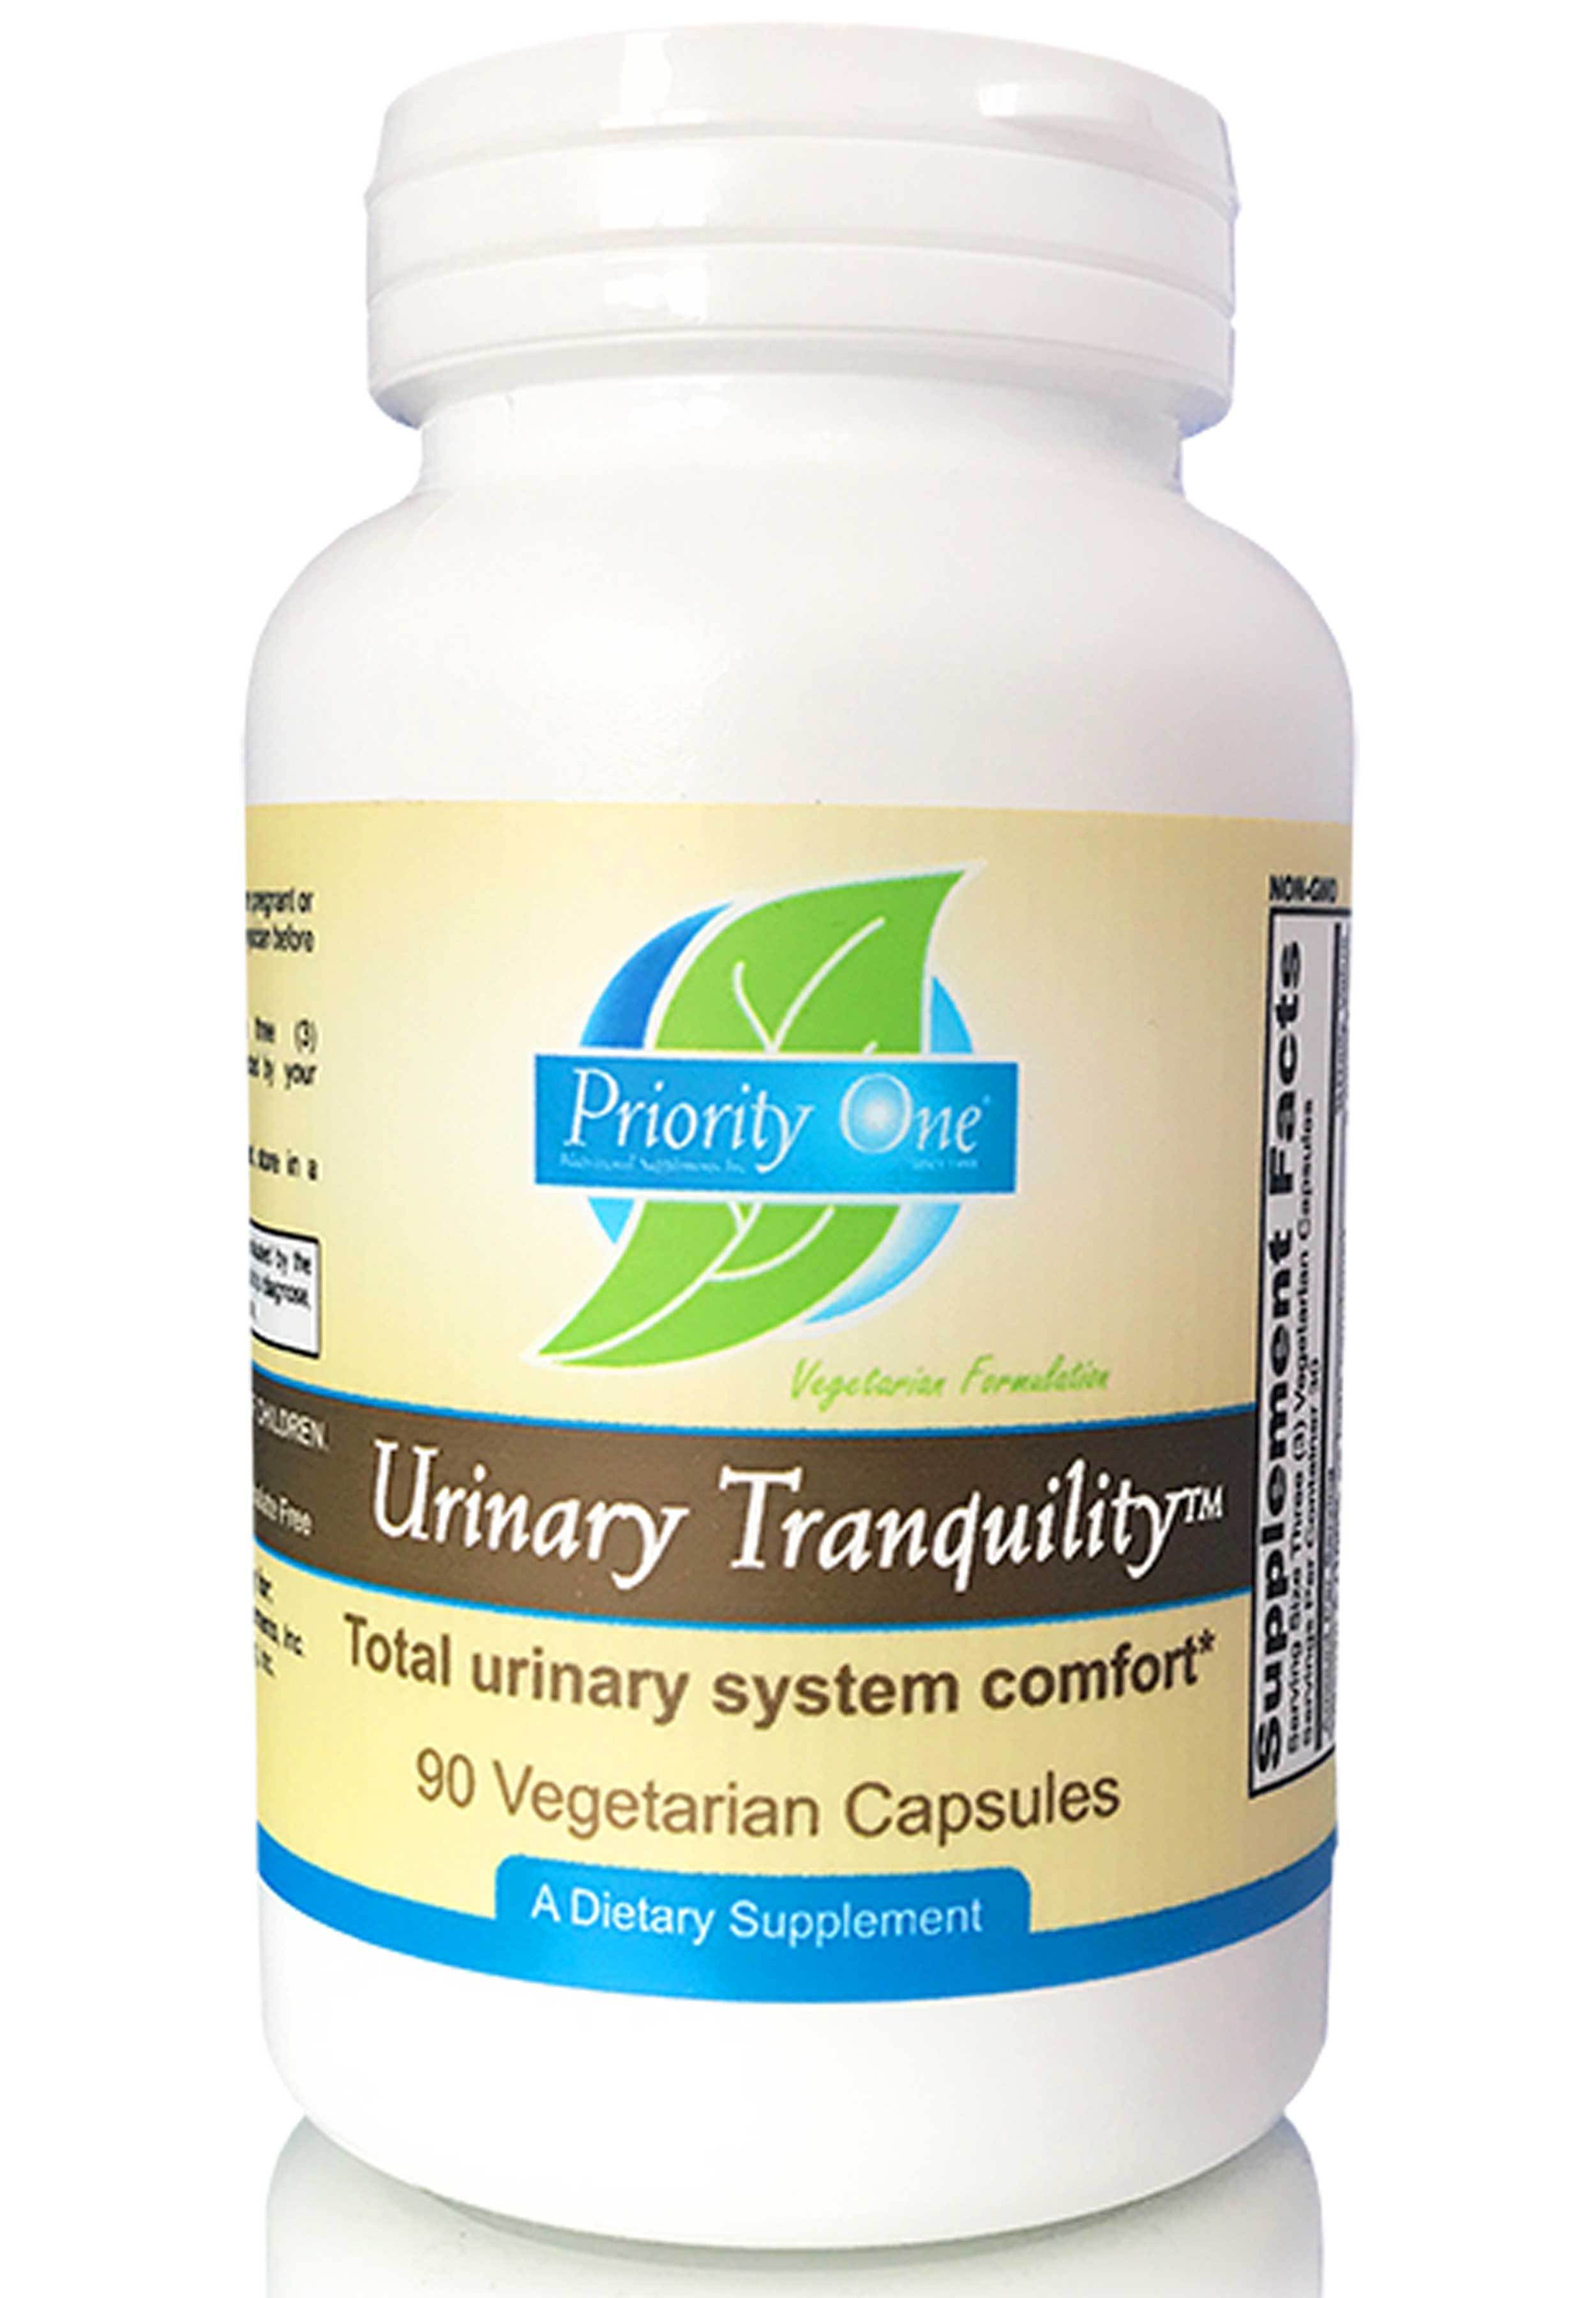 Priority One Urinary Tranquility